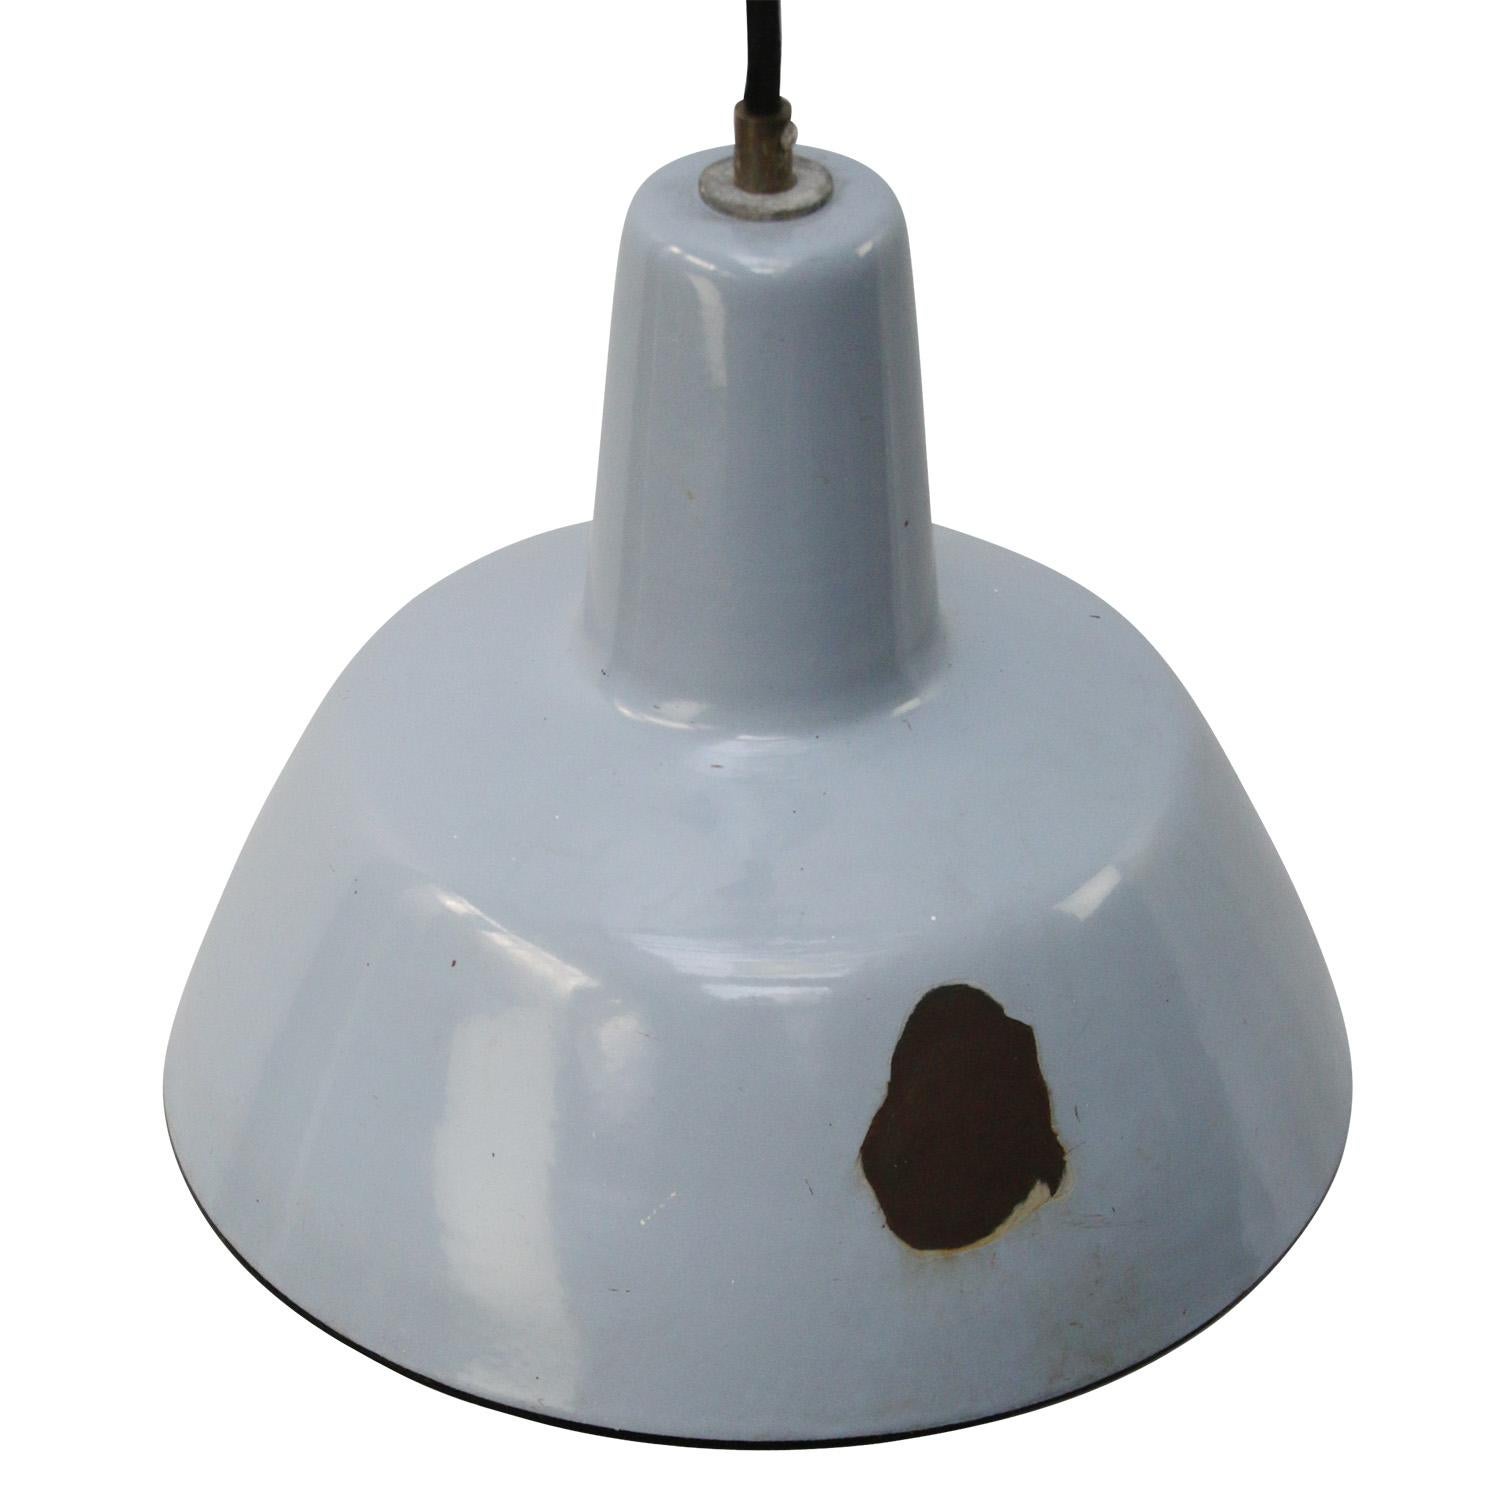 Industrial hanging lamp made by Philips, Holland.
Gray enamel white interior.

Weight: 1.20 kg / 2.6 lb

Priced per individual item. All lamps have been made suitable by international standards for incandescent light bulbs, energy-efficient and